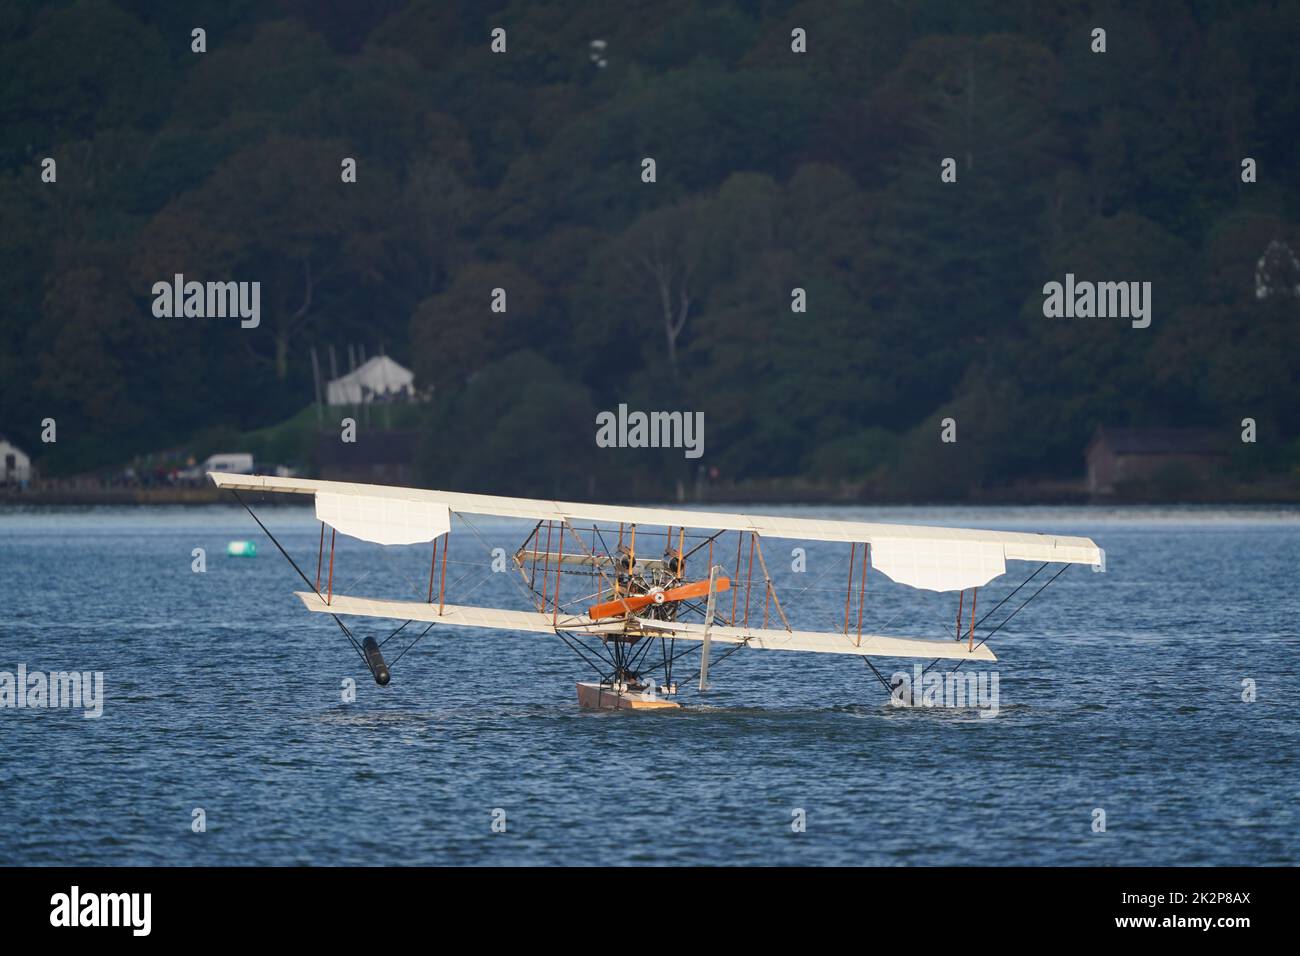 A replica of Waterbird, the UK's first successful seaplane and the only one its kind in the world, during its first public flight on Lake Windermere in Cumbria. The event marks the climax of a 13-year project to create an exact copy of the Waterbird and apart from a modern engine, it faithfully recreates the detail of the original from 1911 seaplane. Picture date: Friday September 23, 2022. The replica has been constructed from wood, bamboo and wires, the same materials used to construct the original seaplane. The 35ft long aircraft, has a wingspan of 40ft and weighs just 1000lb. It is powered Stock Photo